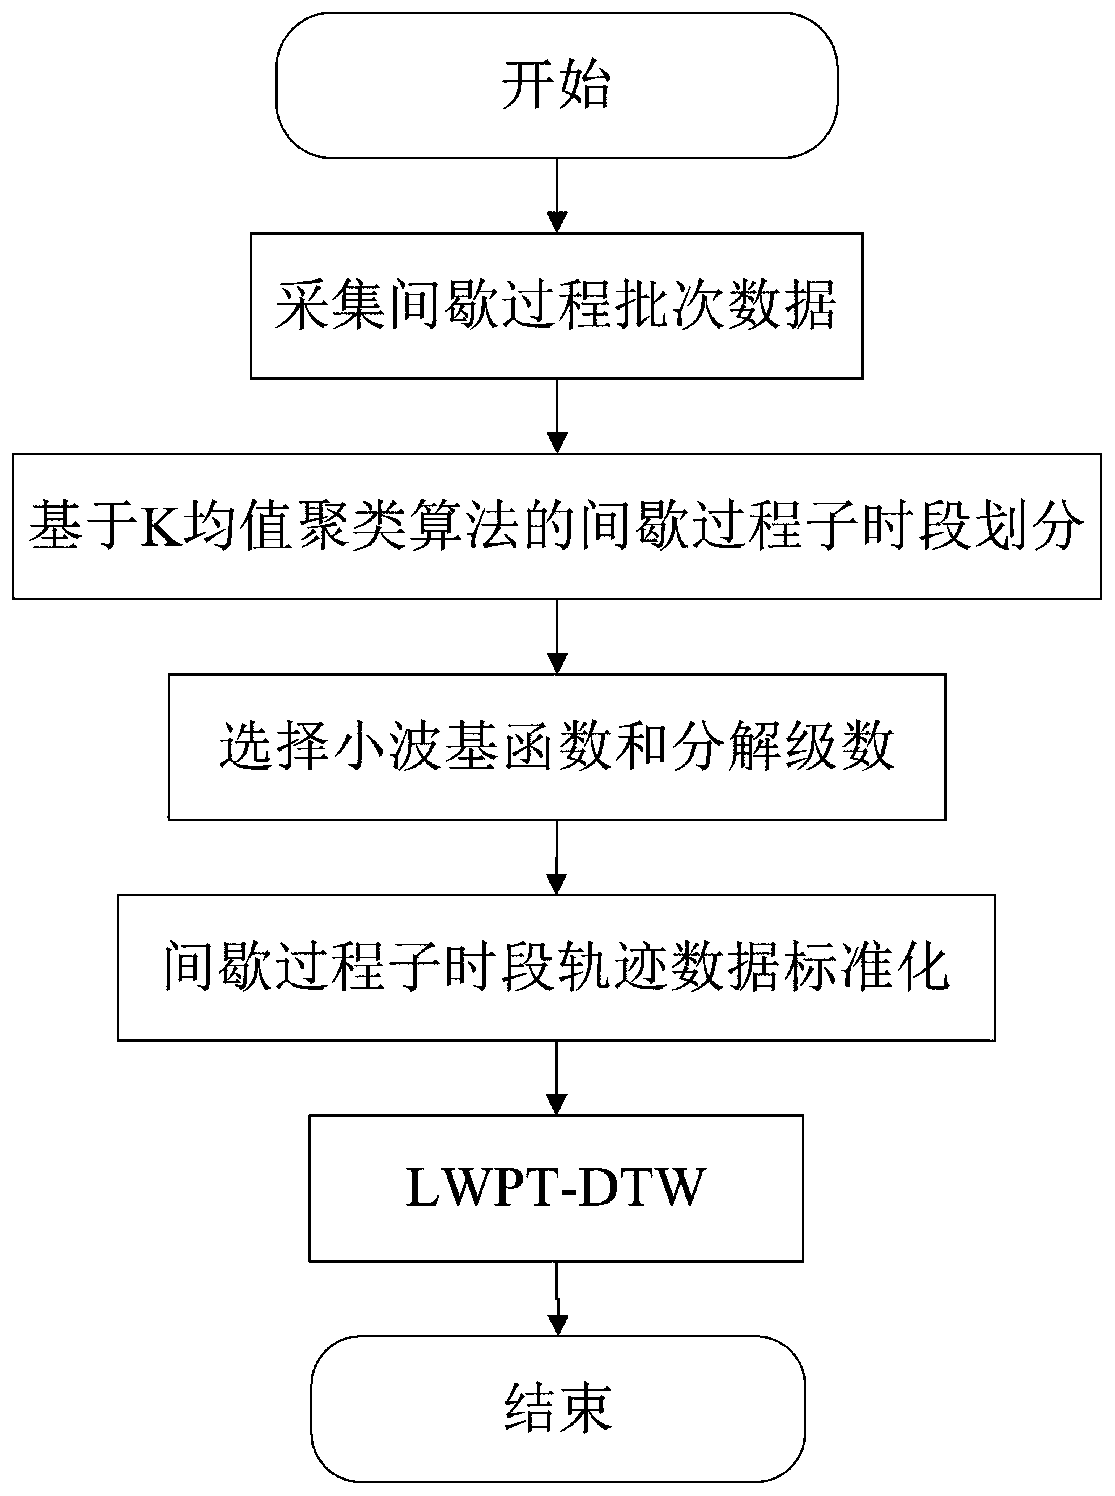 A lwpt-dtw-based method for unequal long-term synchronization of intermittent processes